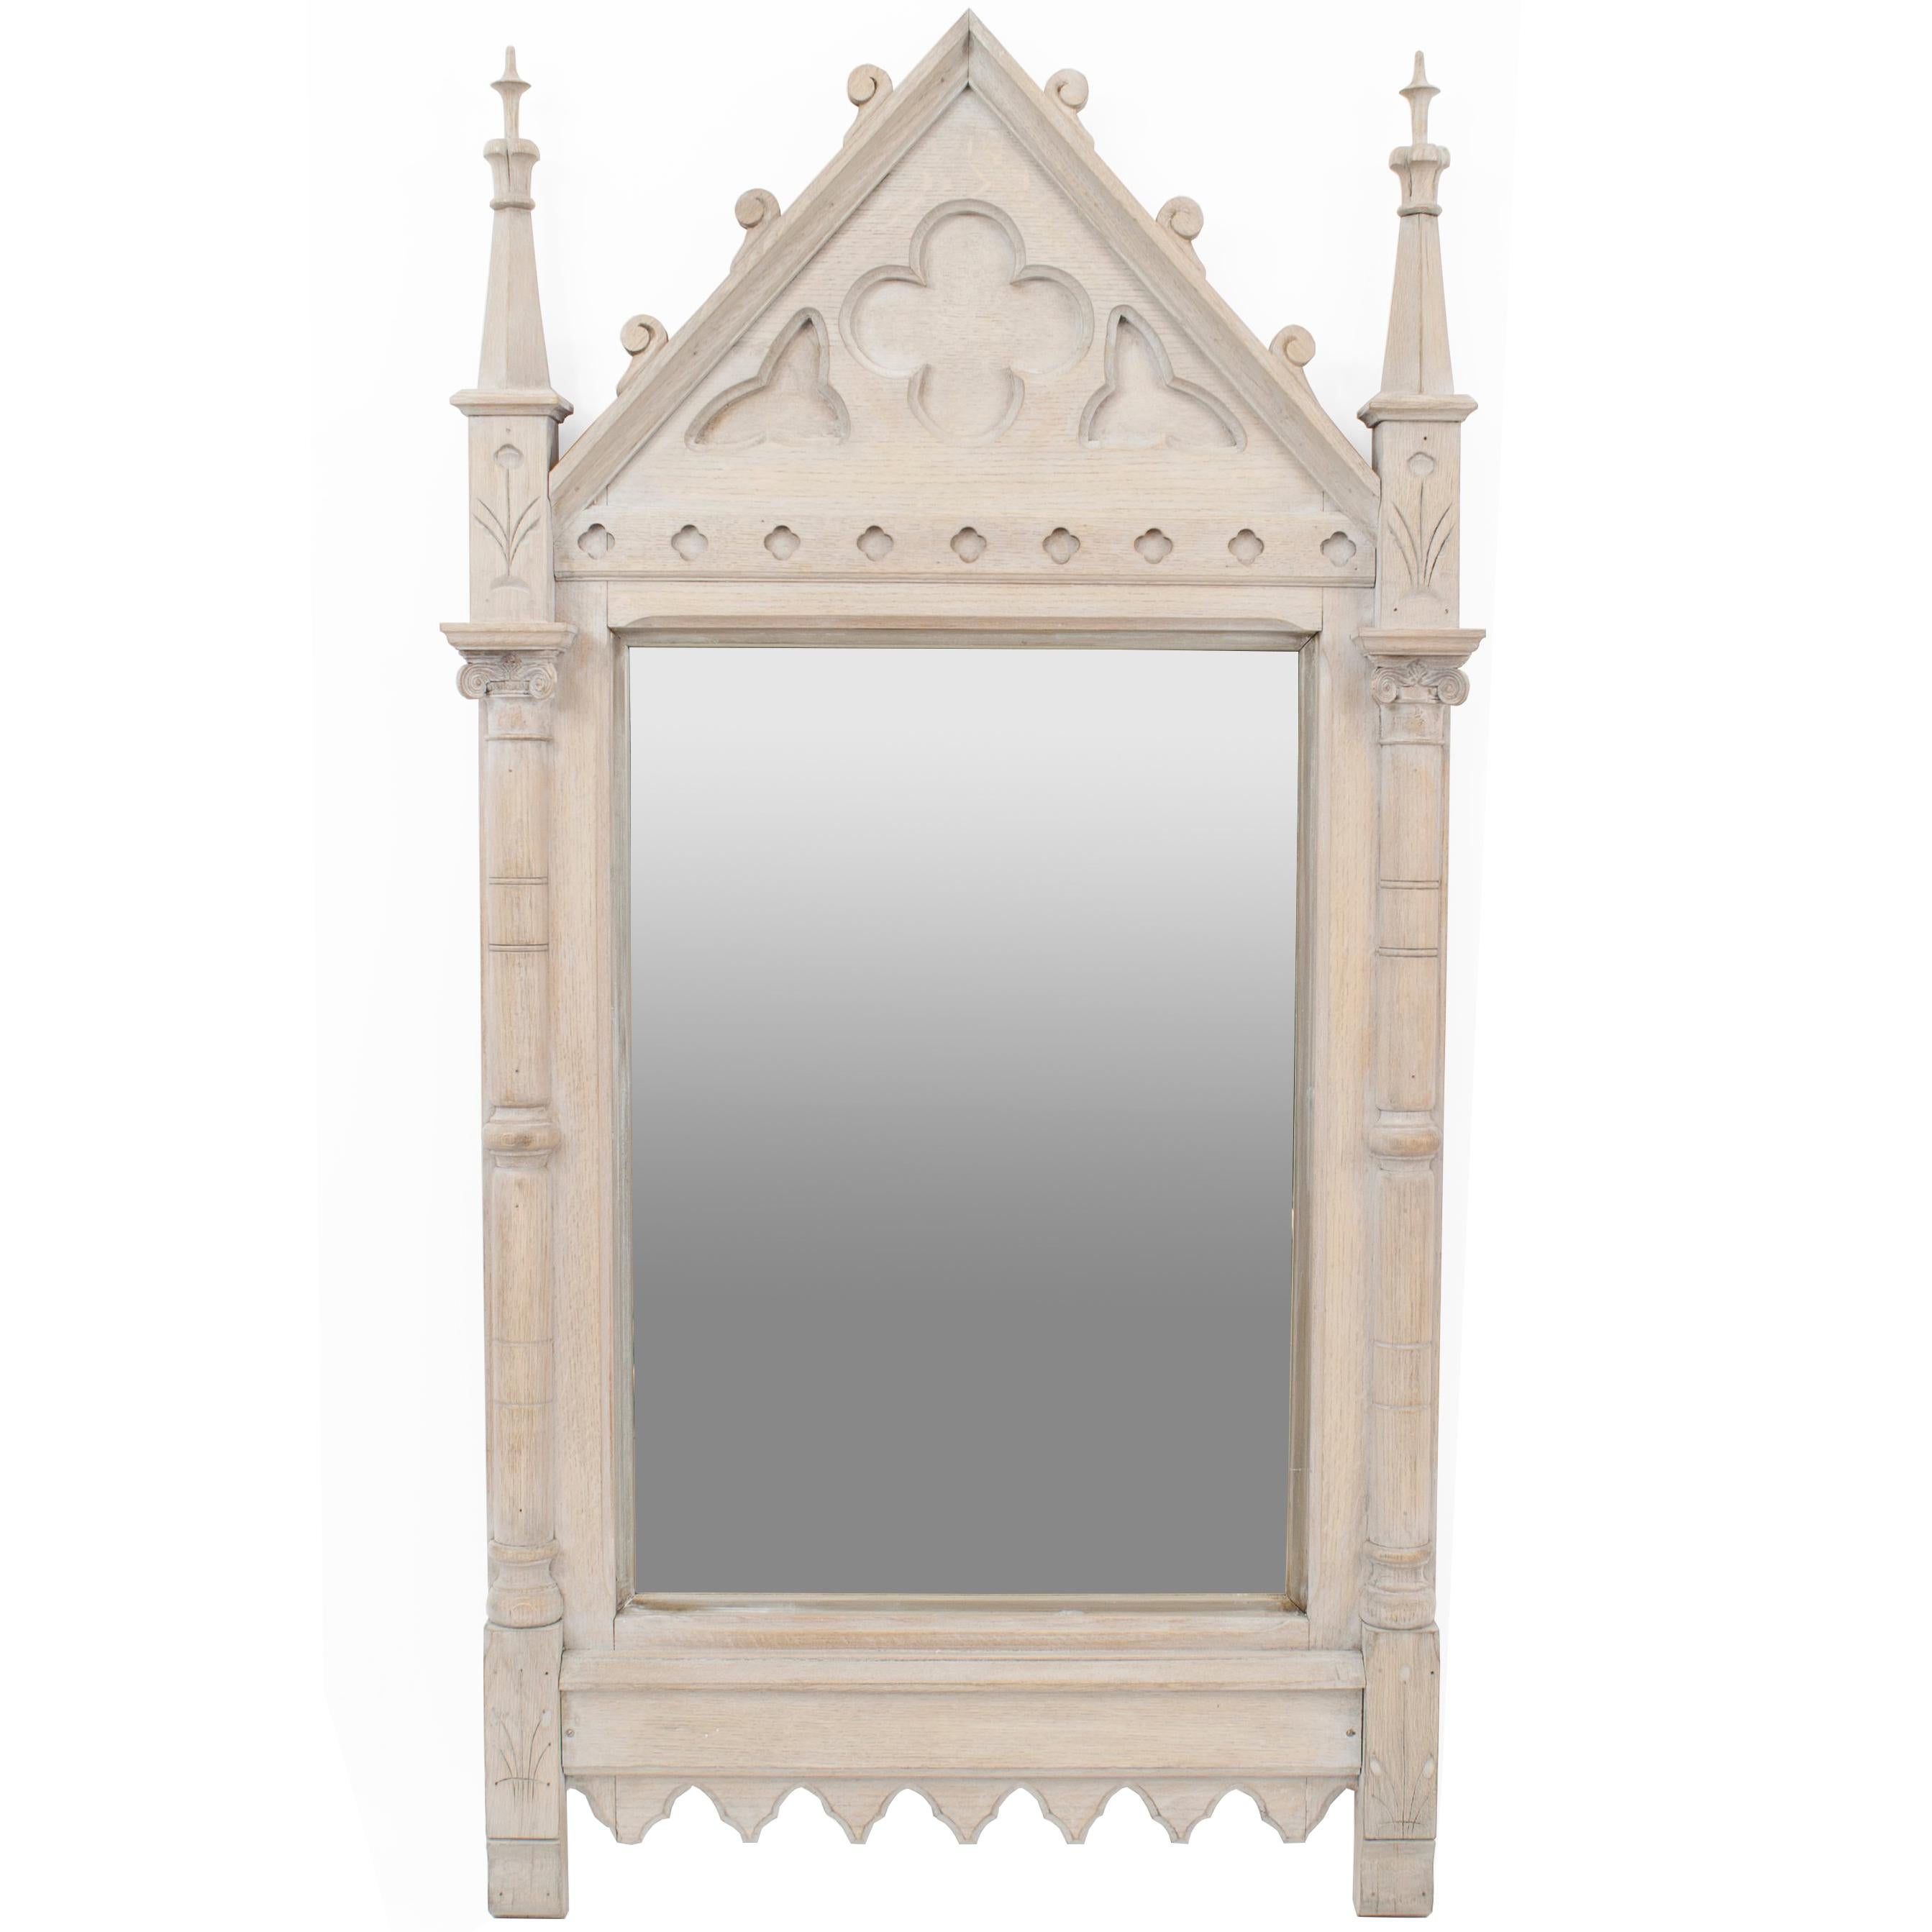 English Gothic Revival 'Late 19th Century' Bleached Oak Wall Mirror